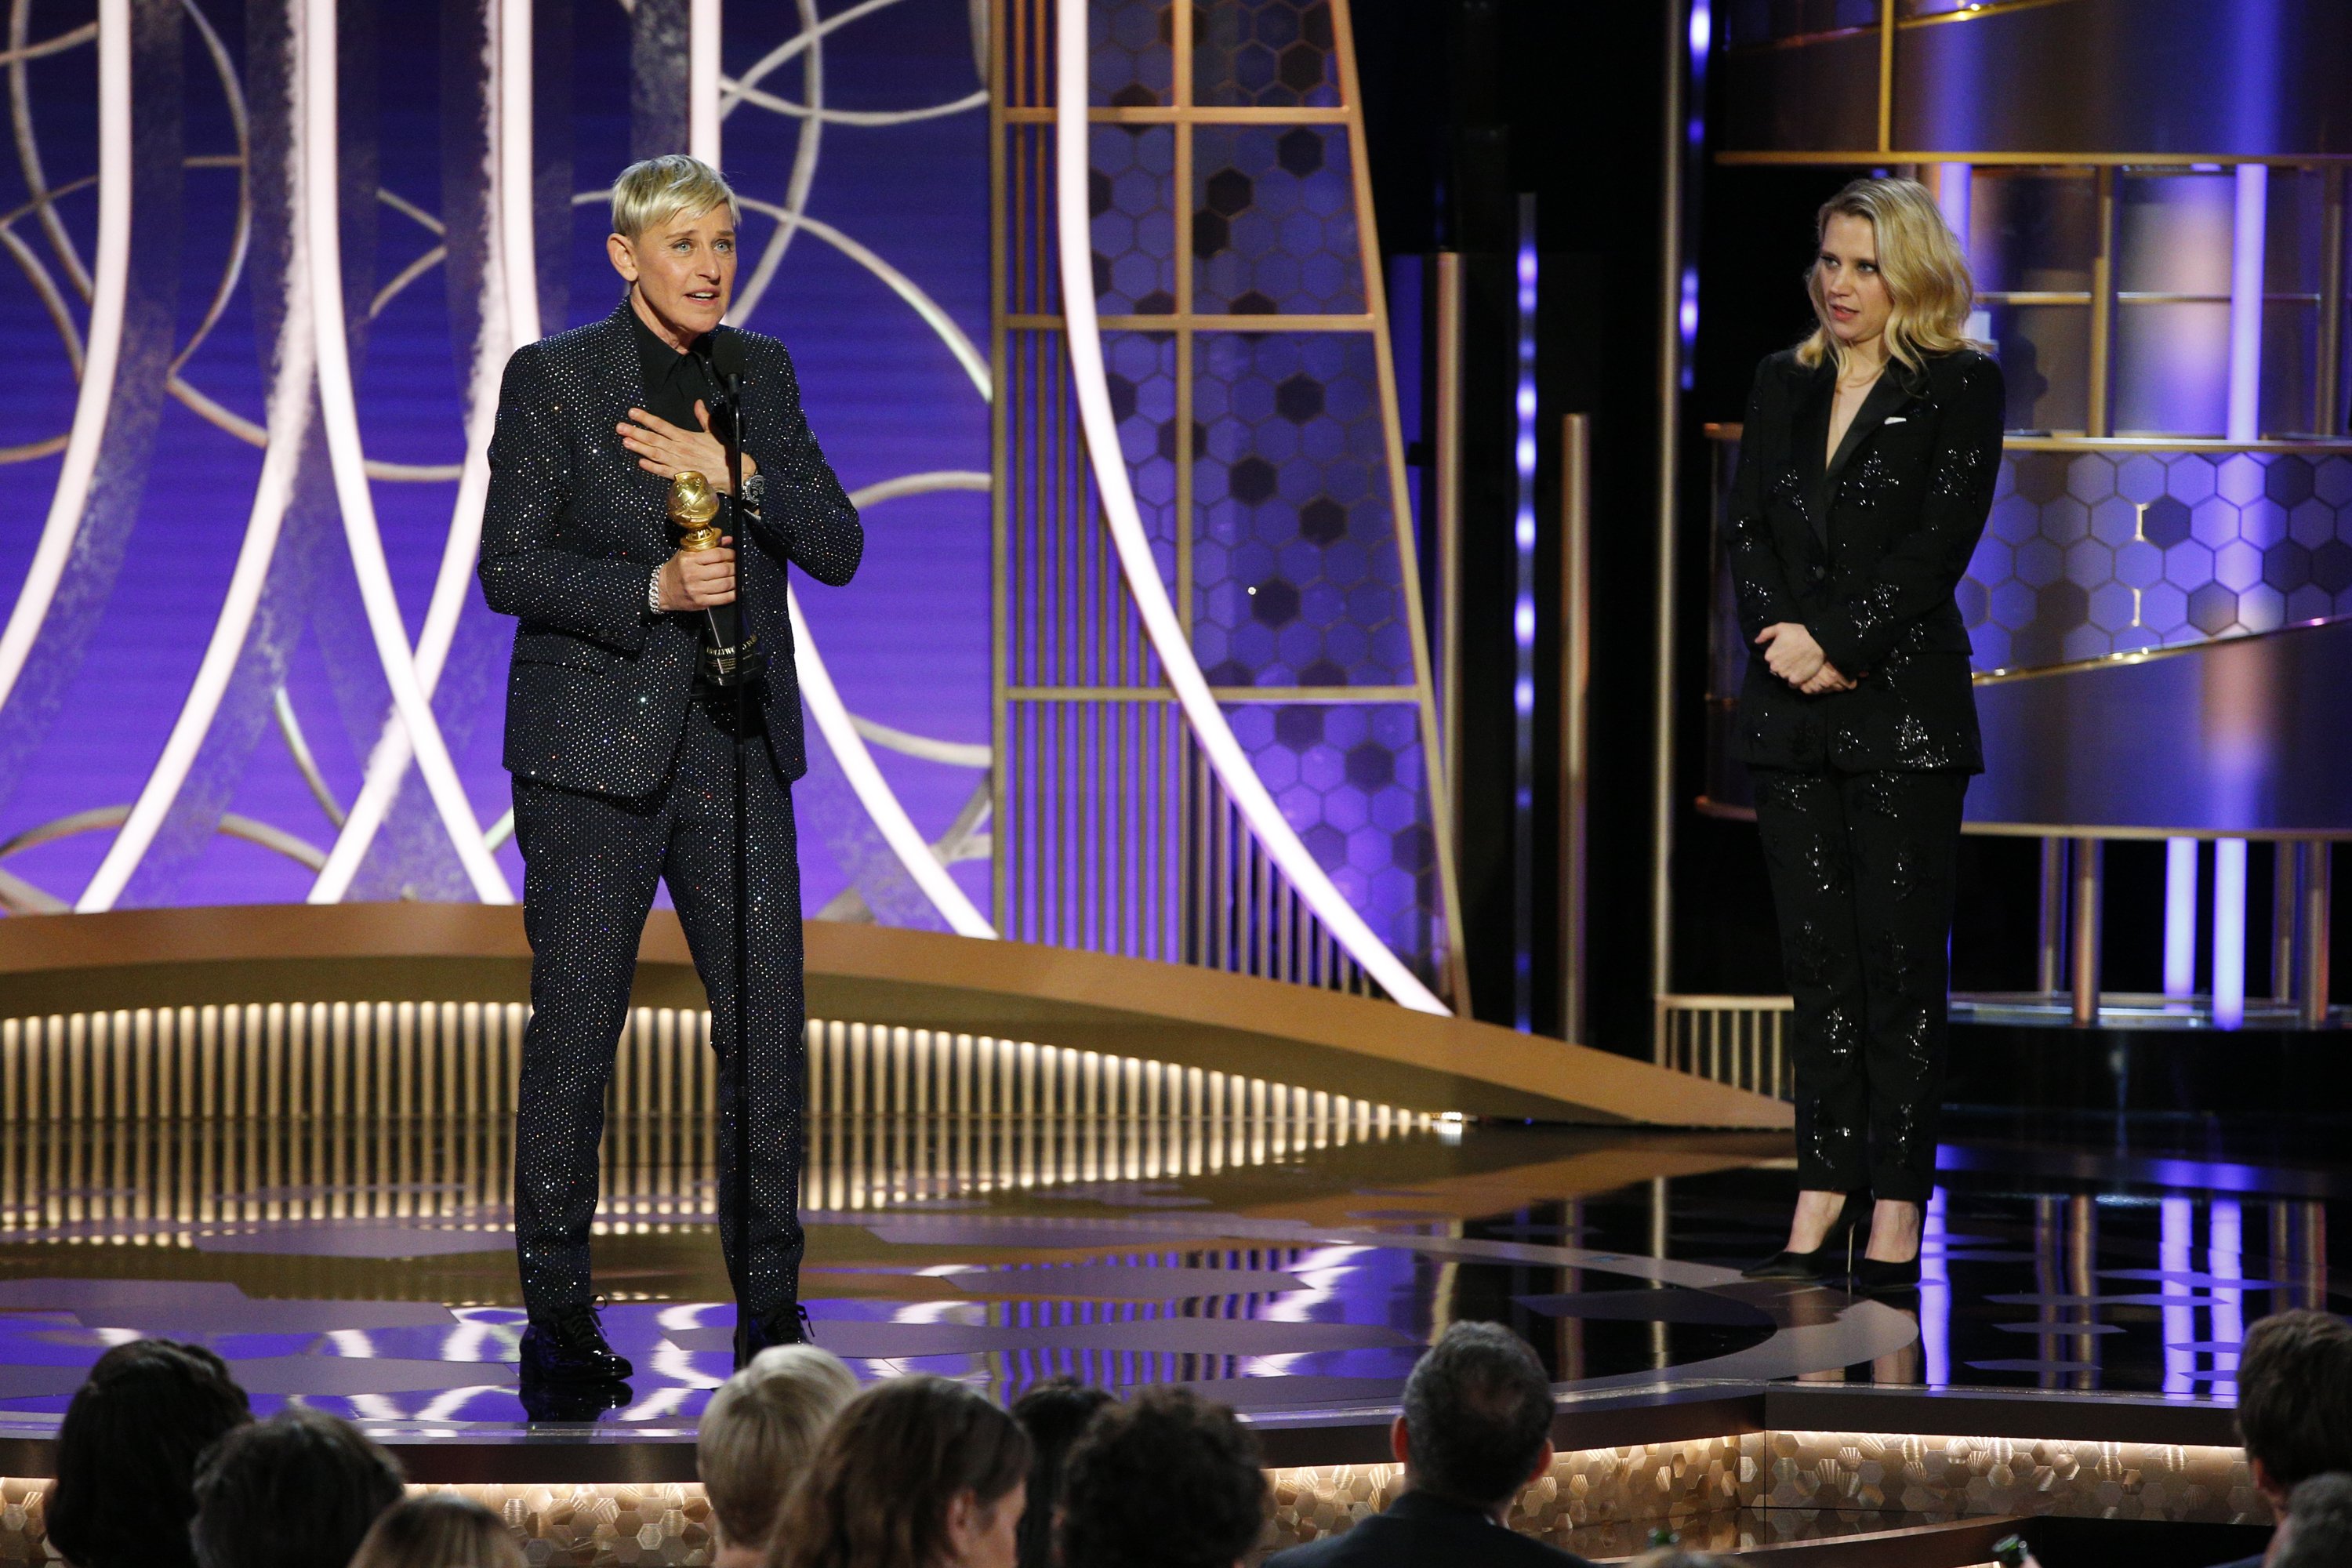 Ellen DeGeneres accepts the CAROL BURNETT AWARD presented by Kate McKinnon onstage during the 77th Annual Golden Globe Awards at The Beverly Hilton Hotel on January 5, 2020, in Beverly Hills, California. | Source: Getty Images